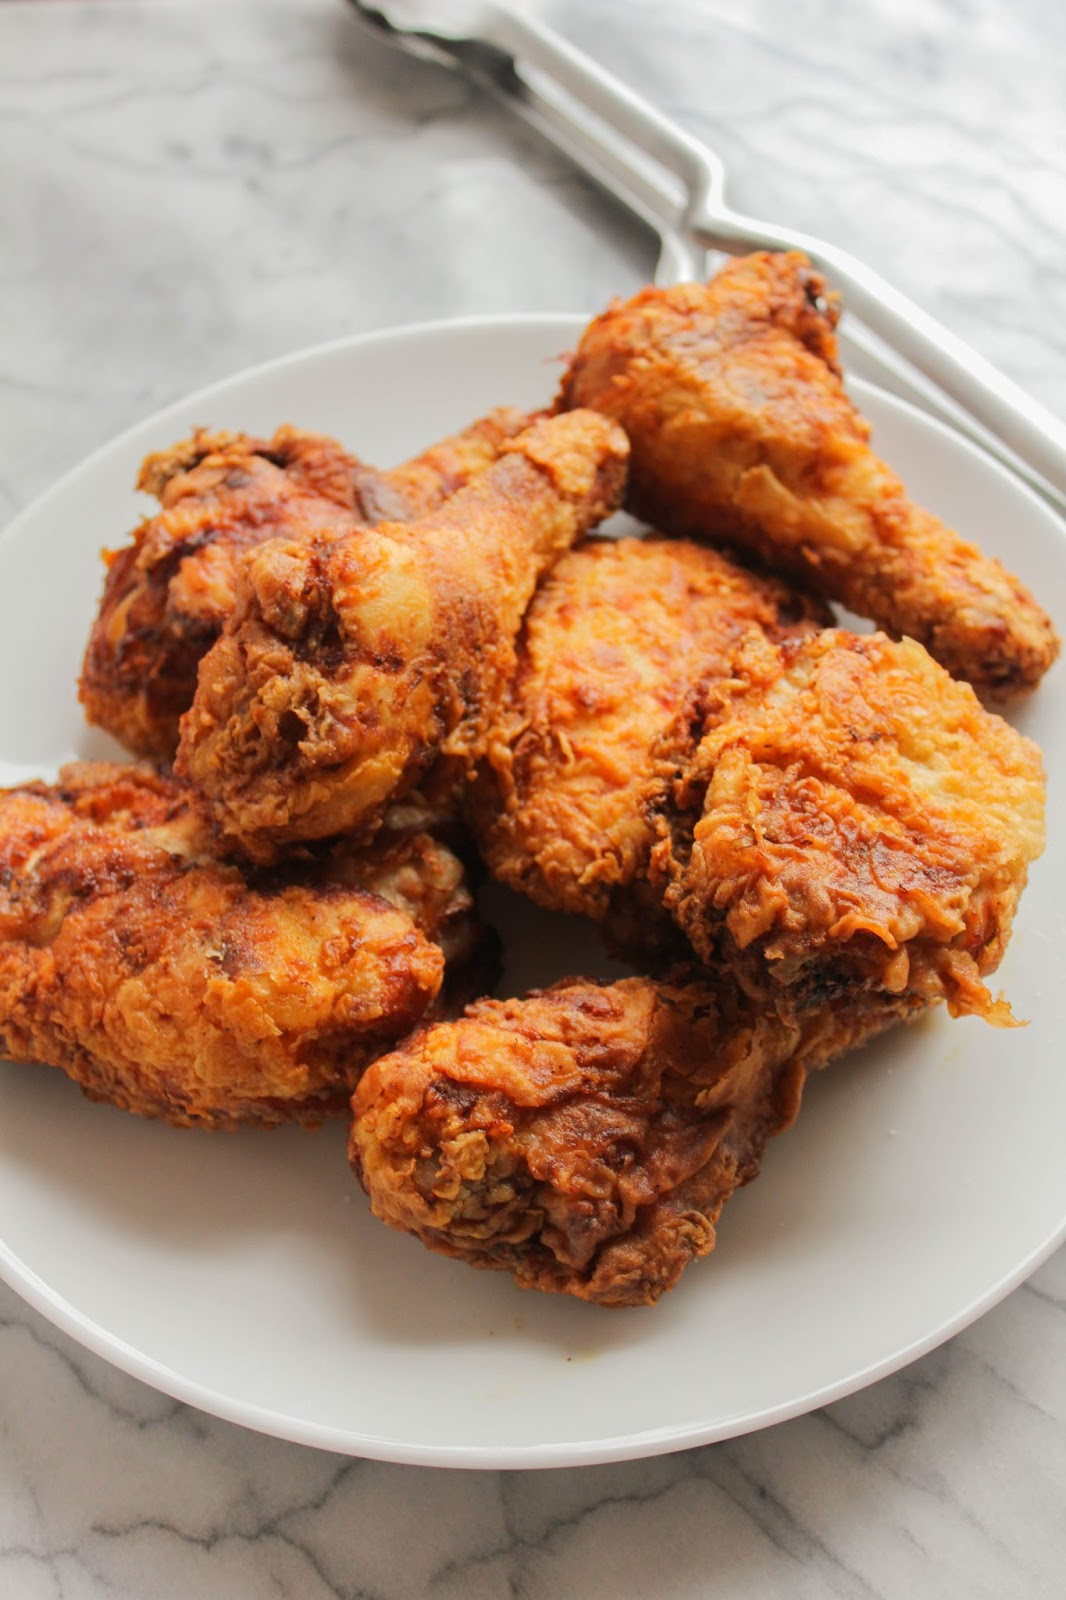 30 Best Maryland's Fried Chicken - Best Recipes Ideas and Collections